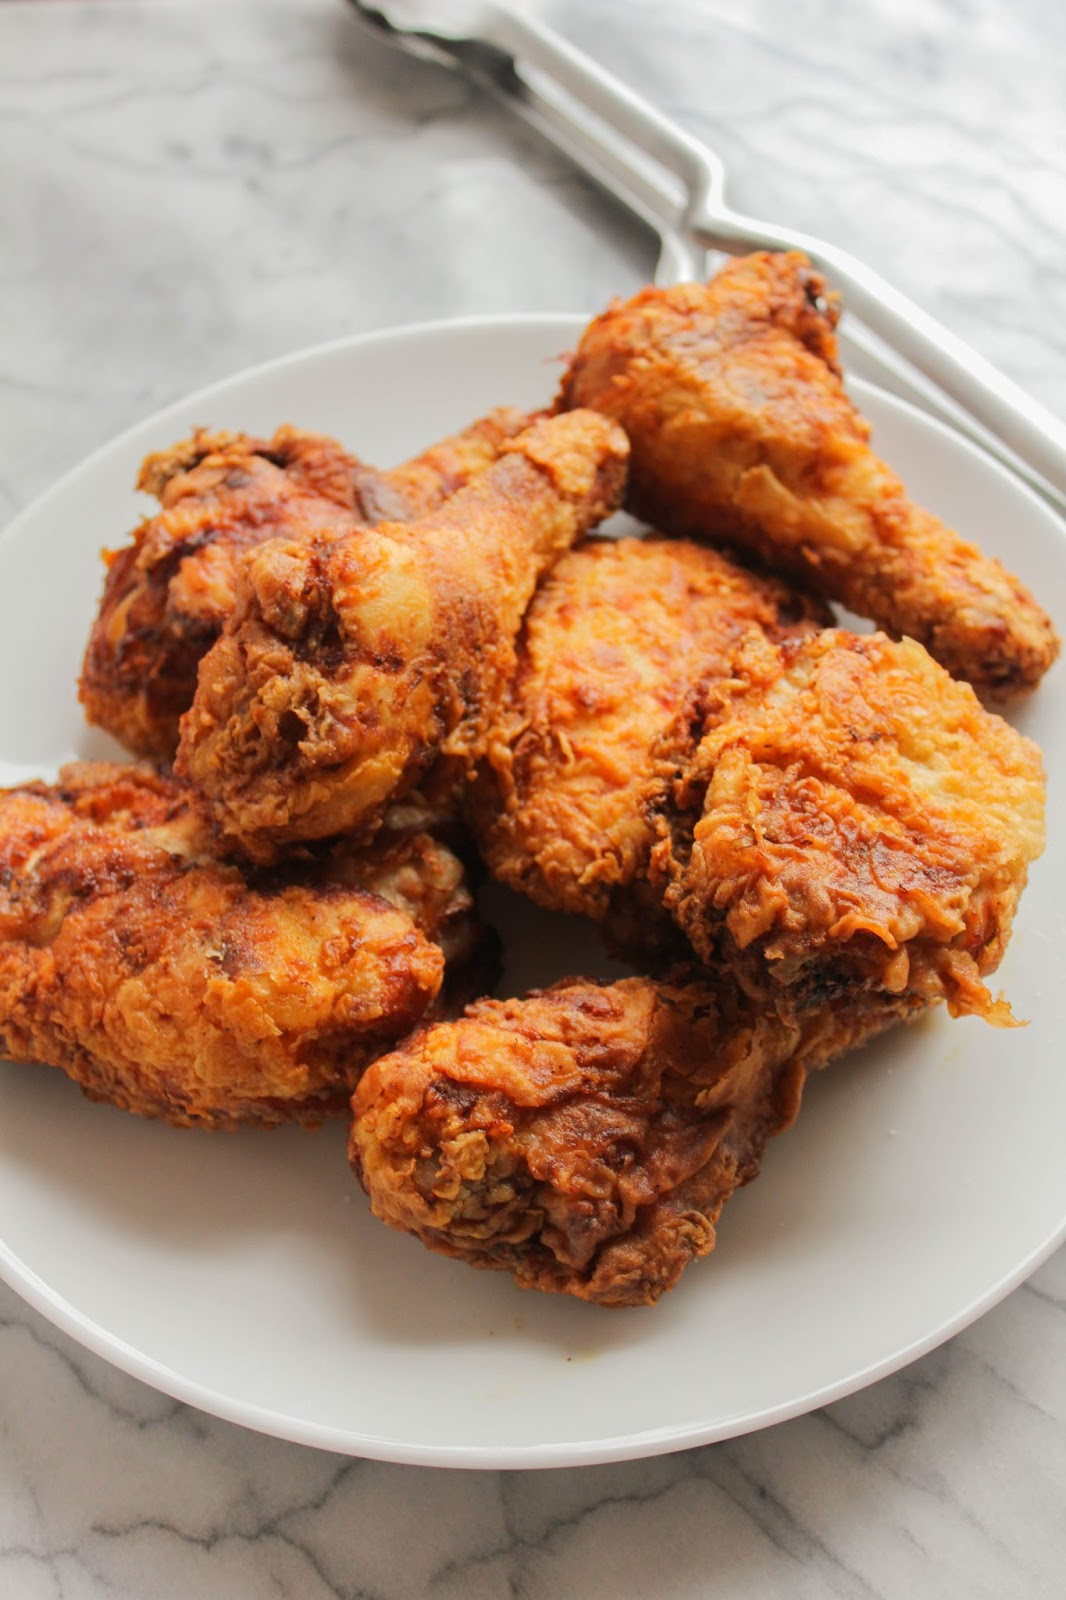 30 Best Maryland's Fried Chicken - Best Recipes Ideas and Collections